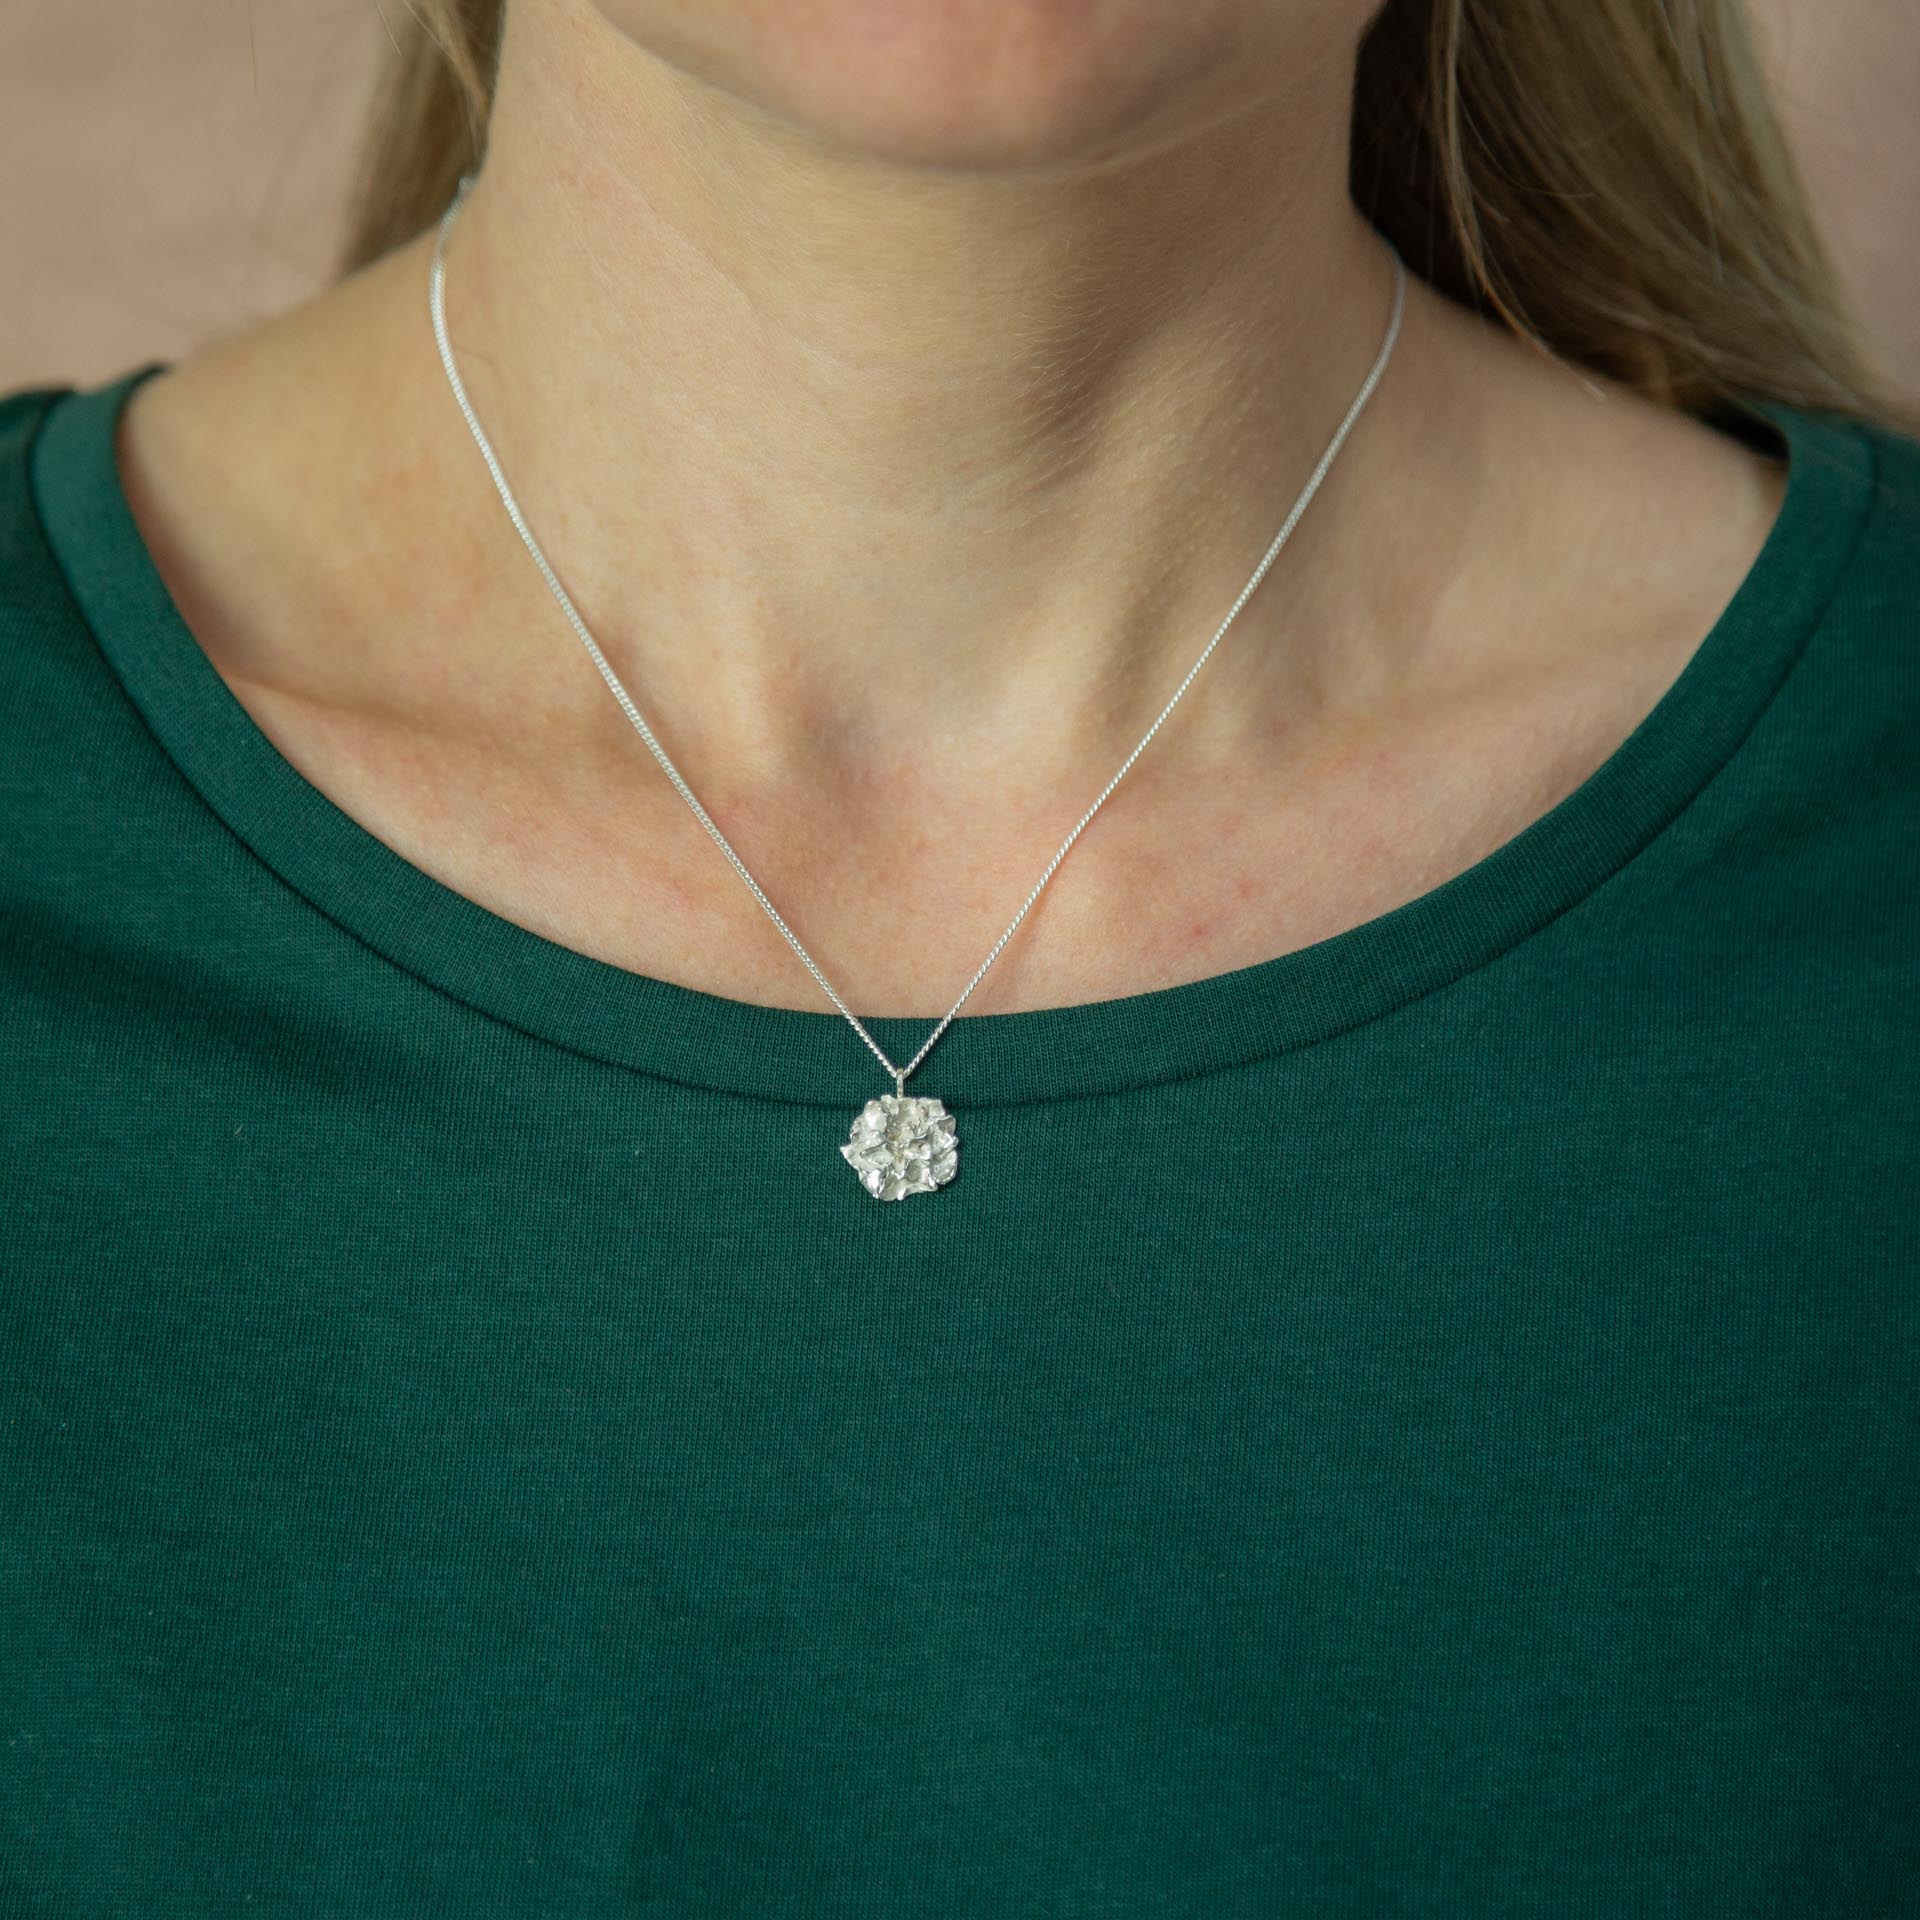 Silver Hedgerow Flower Drop necklace modelled worn with green t-shirt